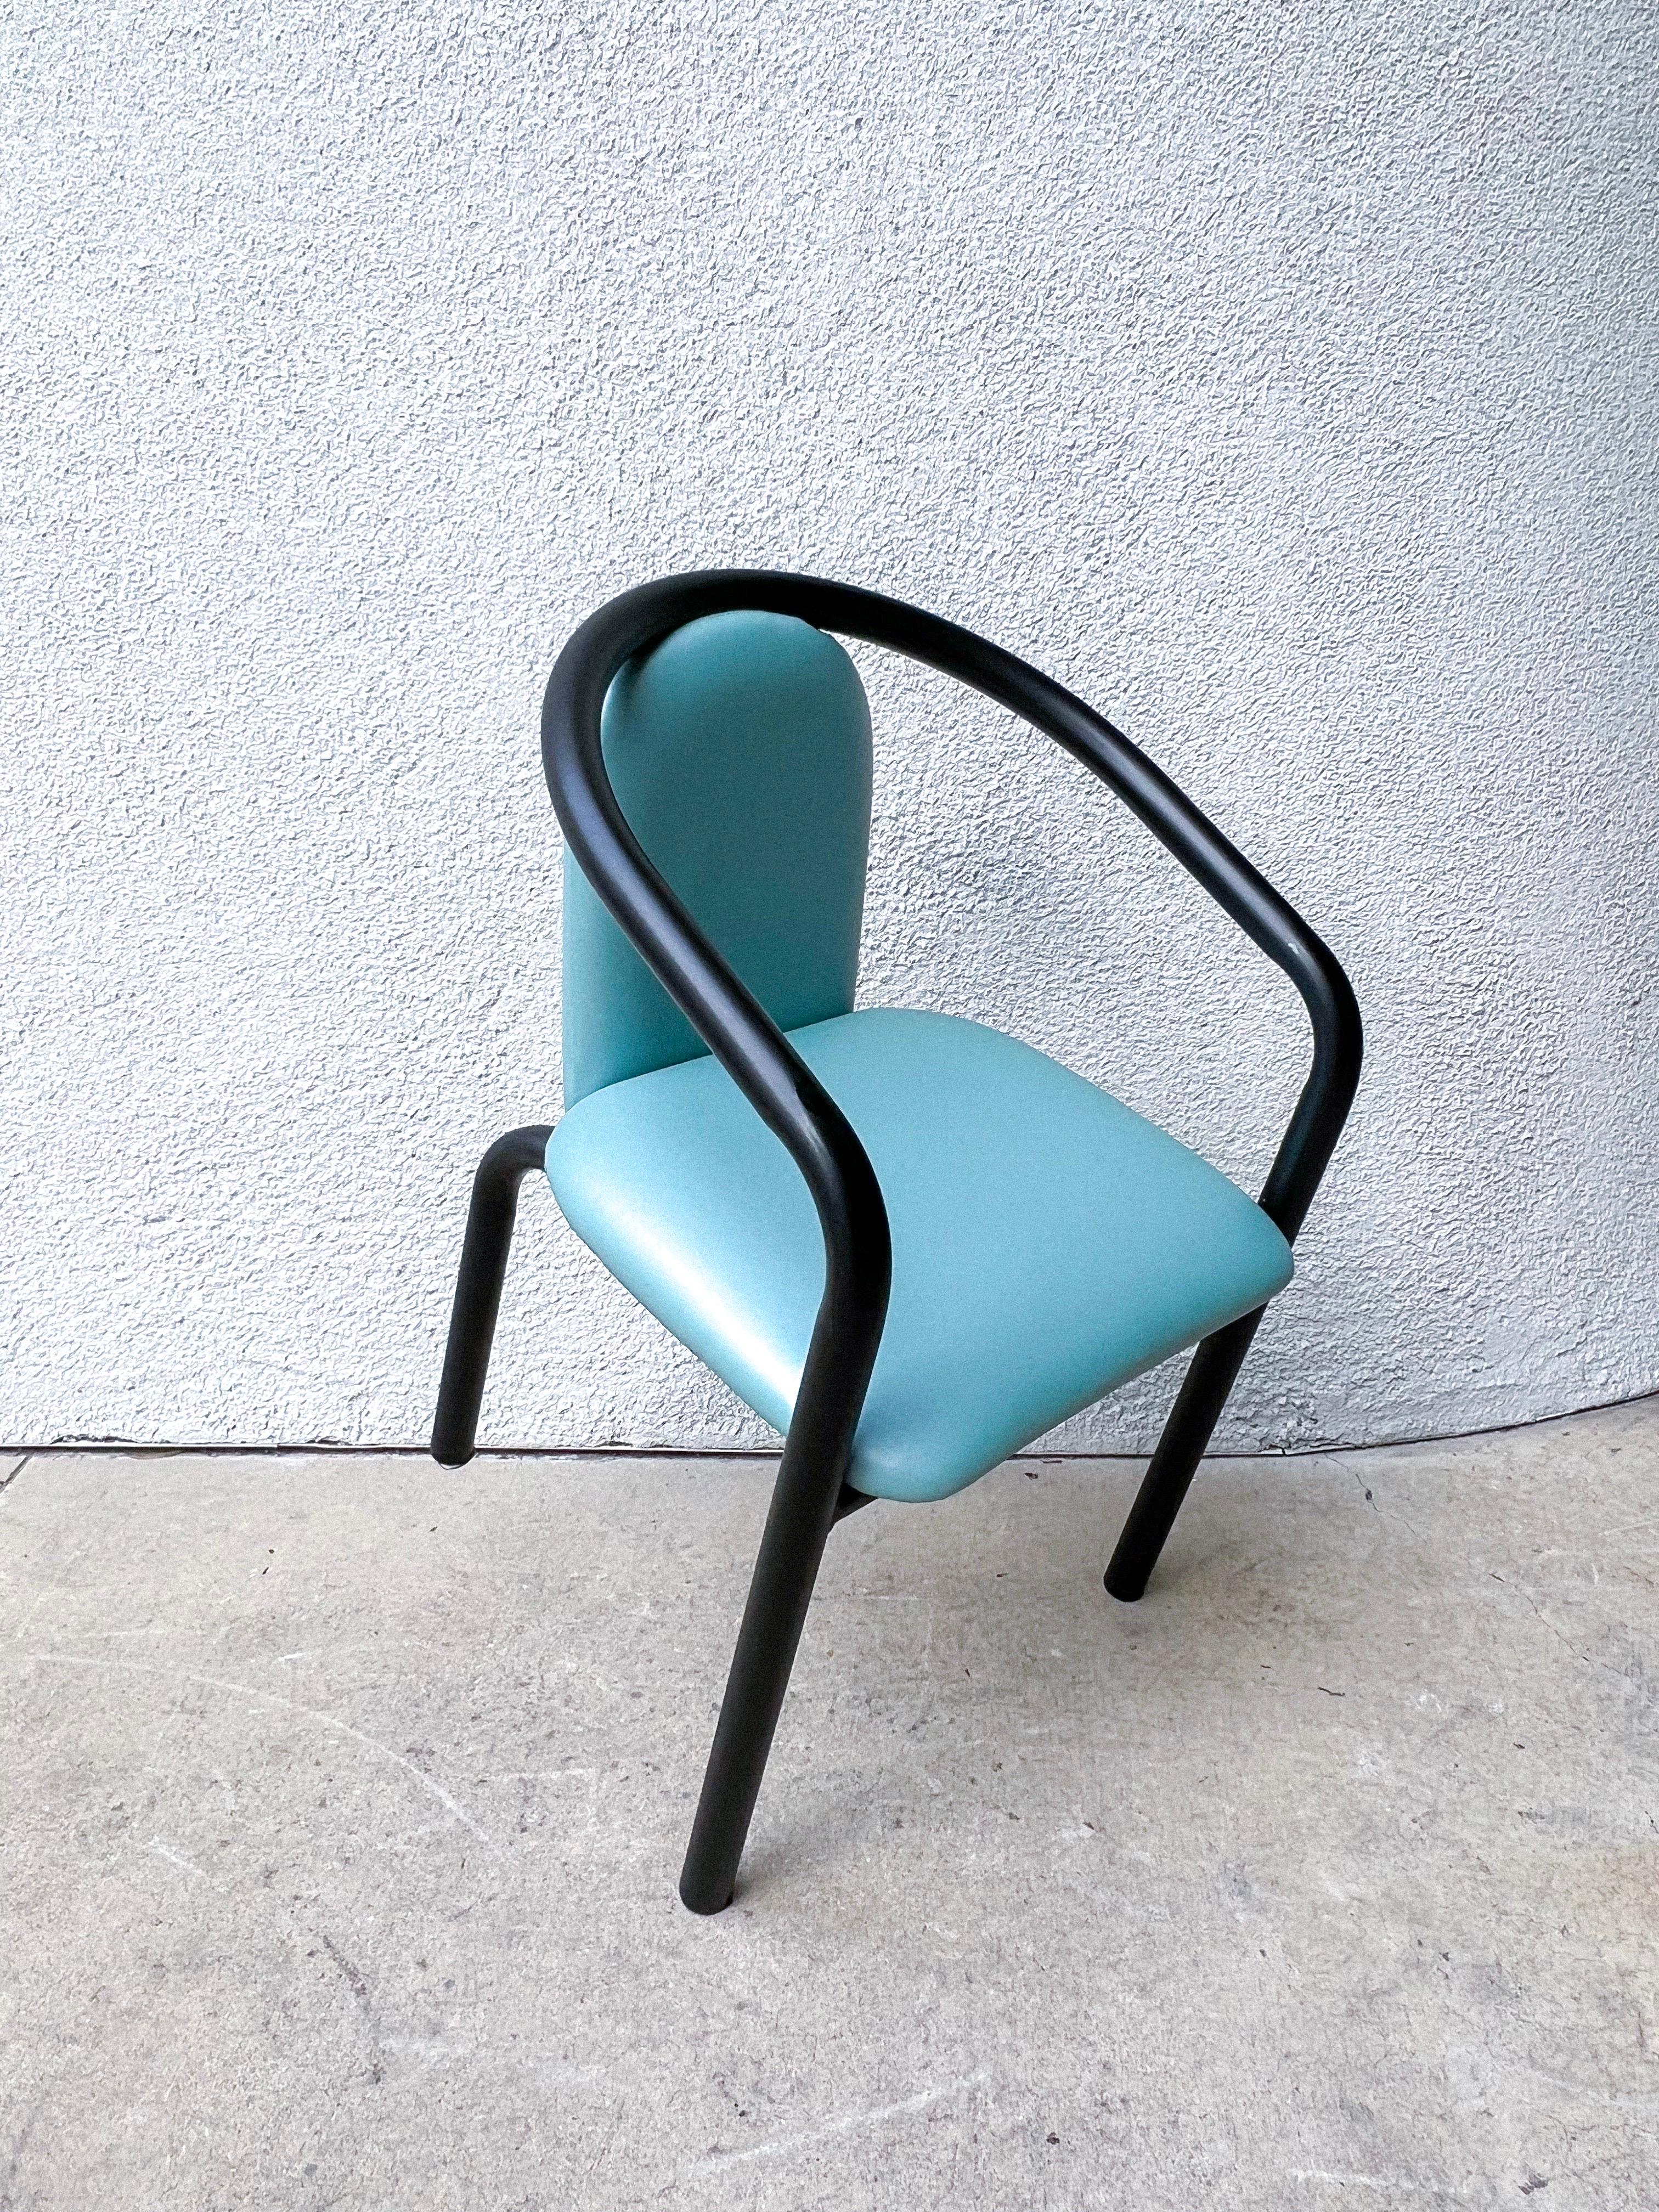 1980s Postmodern Tubular Vinyl Chairs - Set of 4 In Excellent Condition For Sale In La Mesa, CA